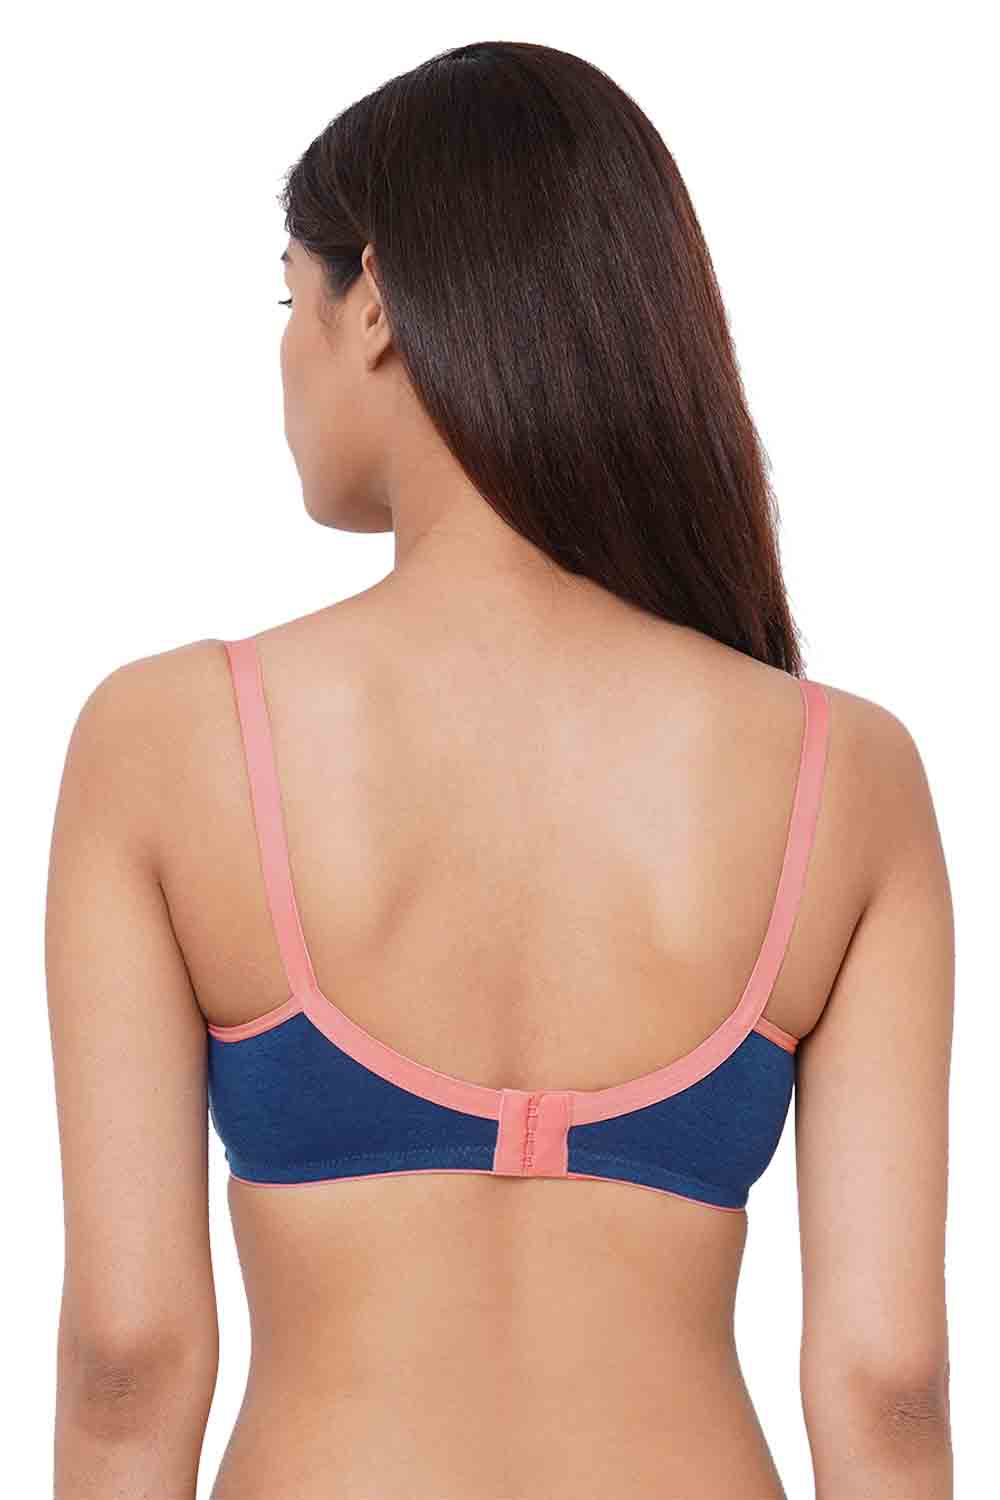 Buy A-E MATERNITY Supersoft Non Wired Nursing Bras 2 Pack 40DD